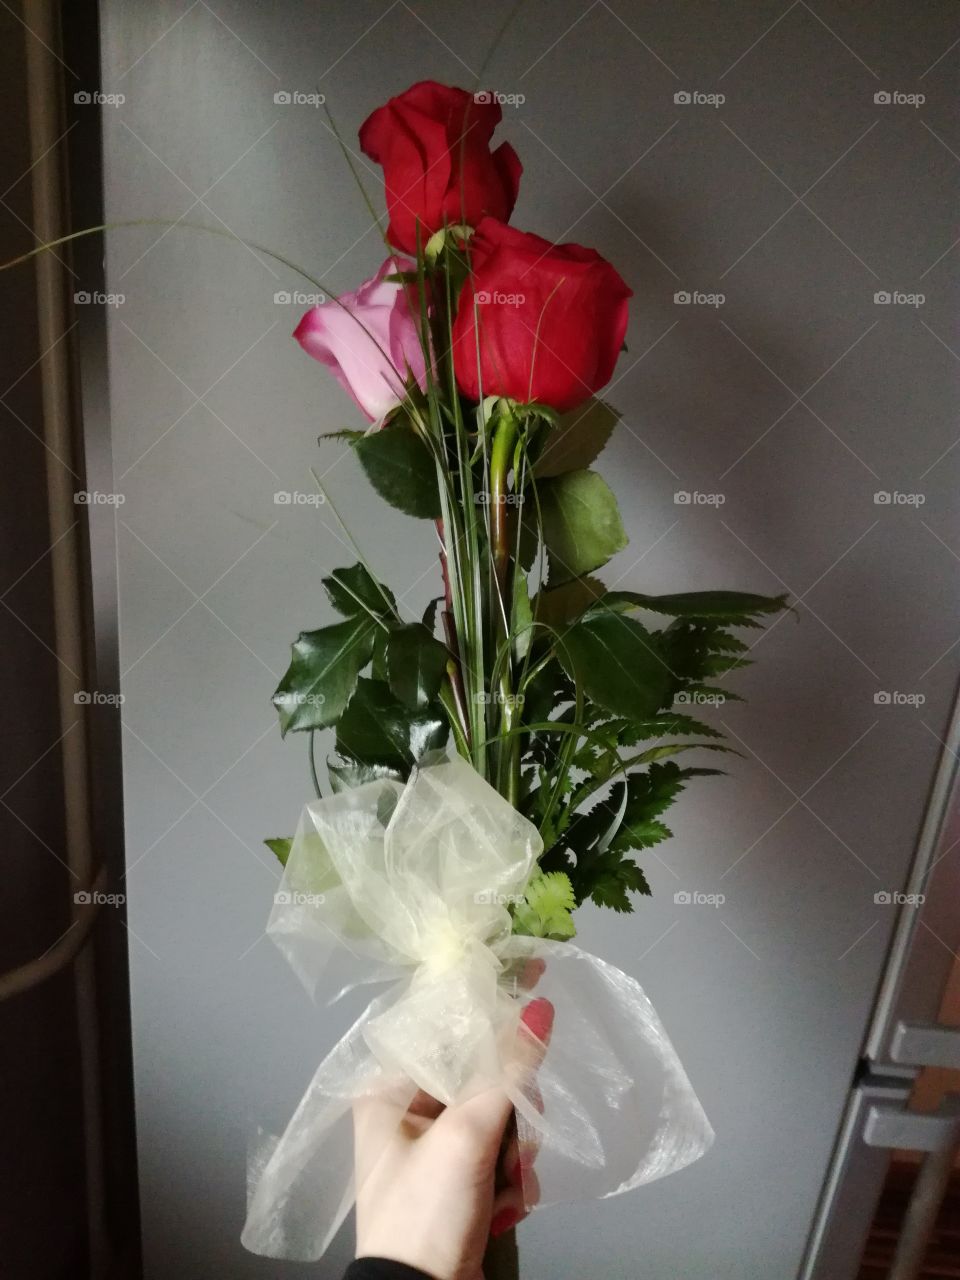 From my love